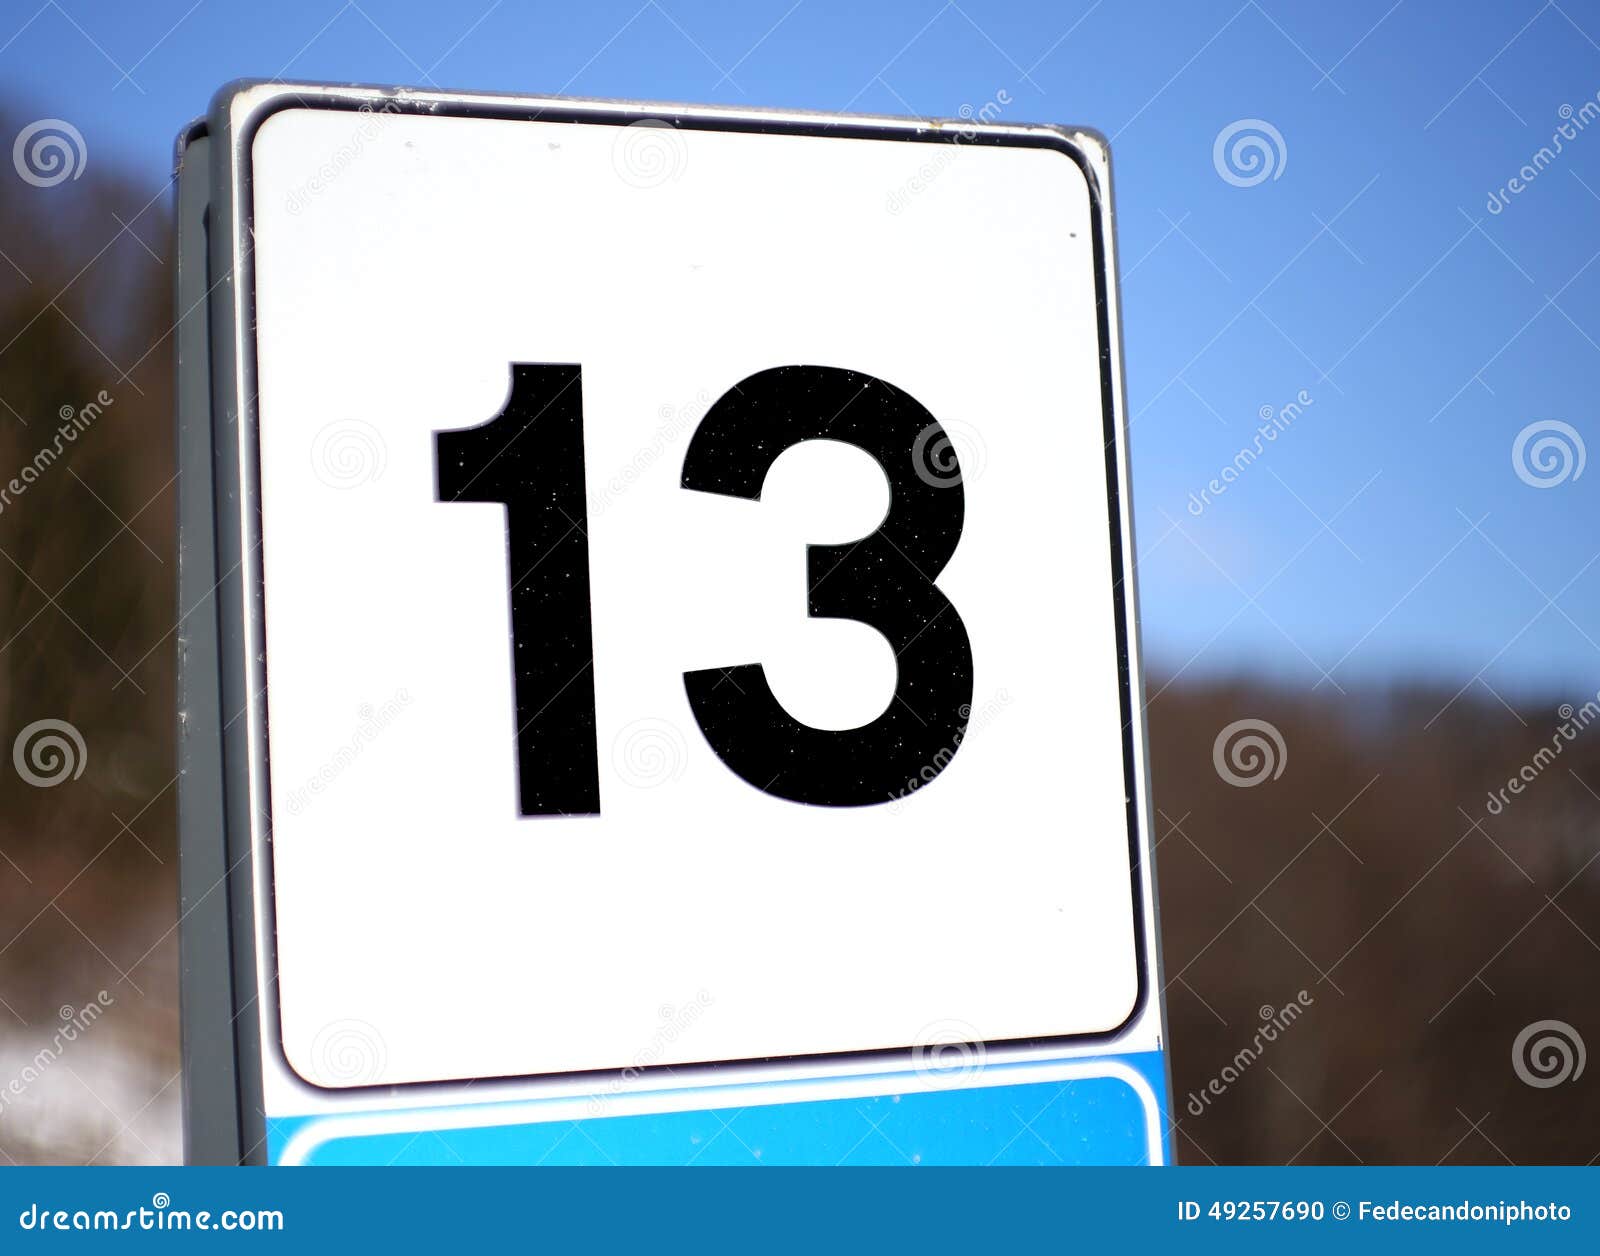 number 13 in a road sign in mountain